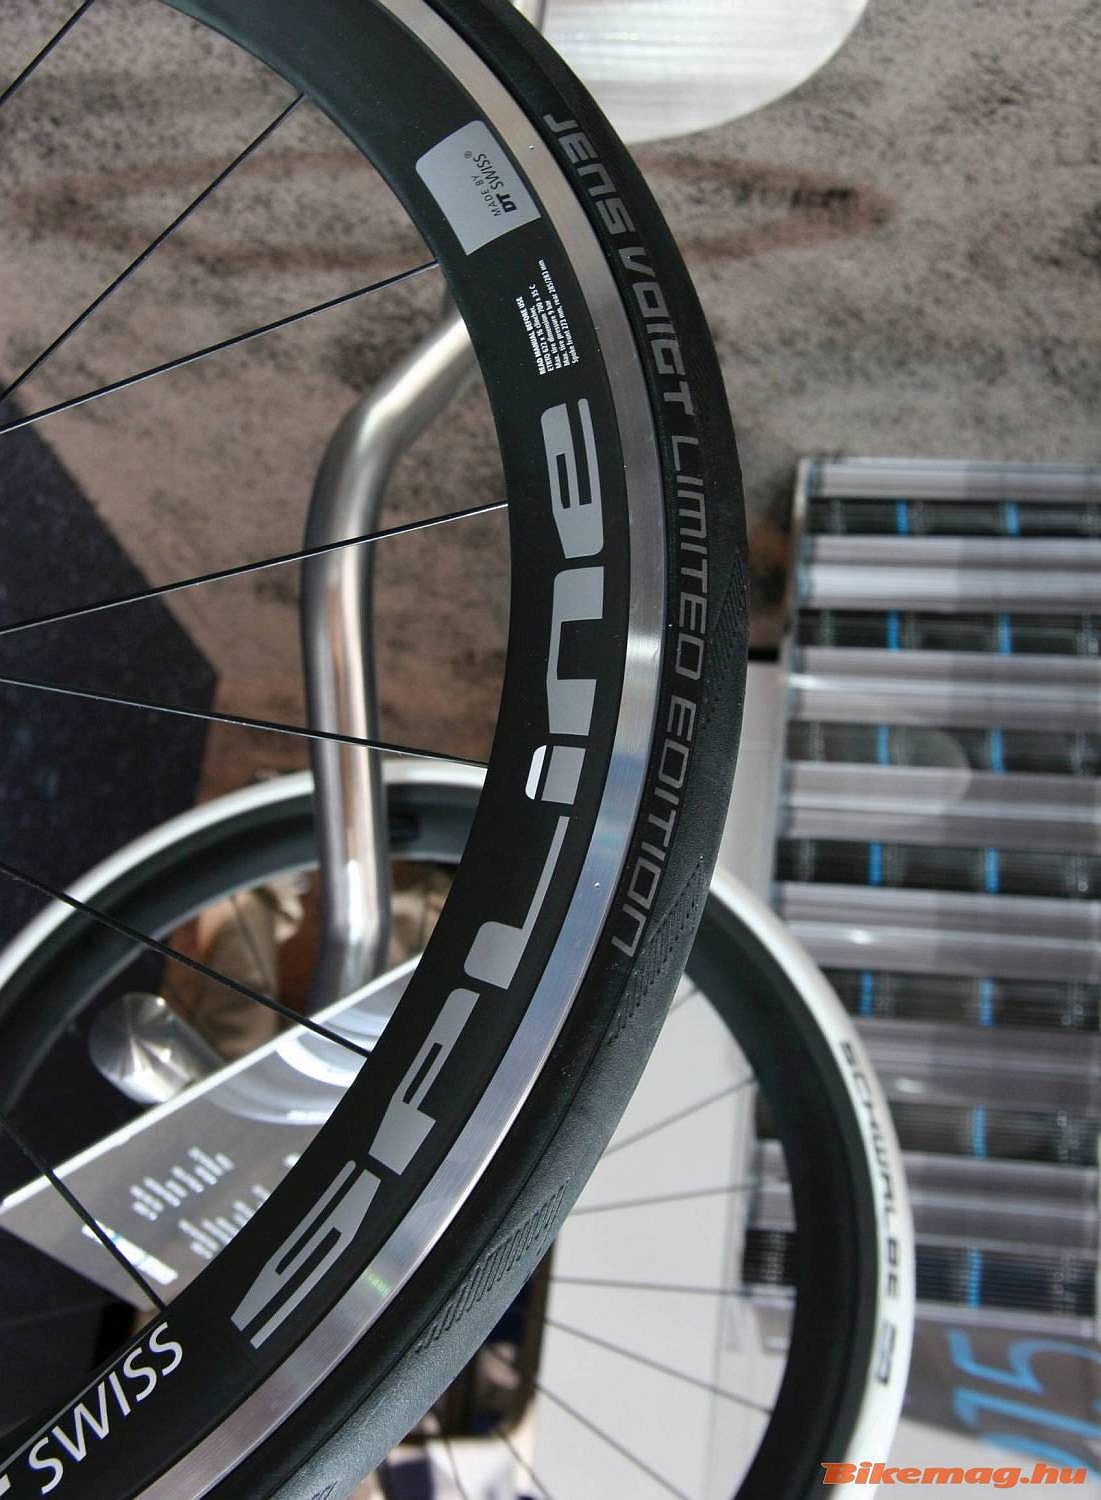 Schwalbe One Jens Voight Limited Edition